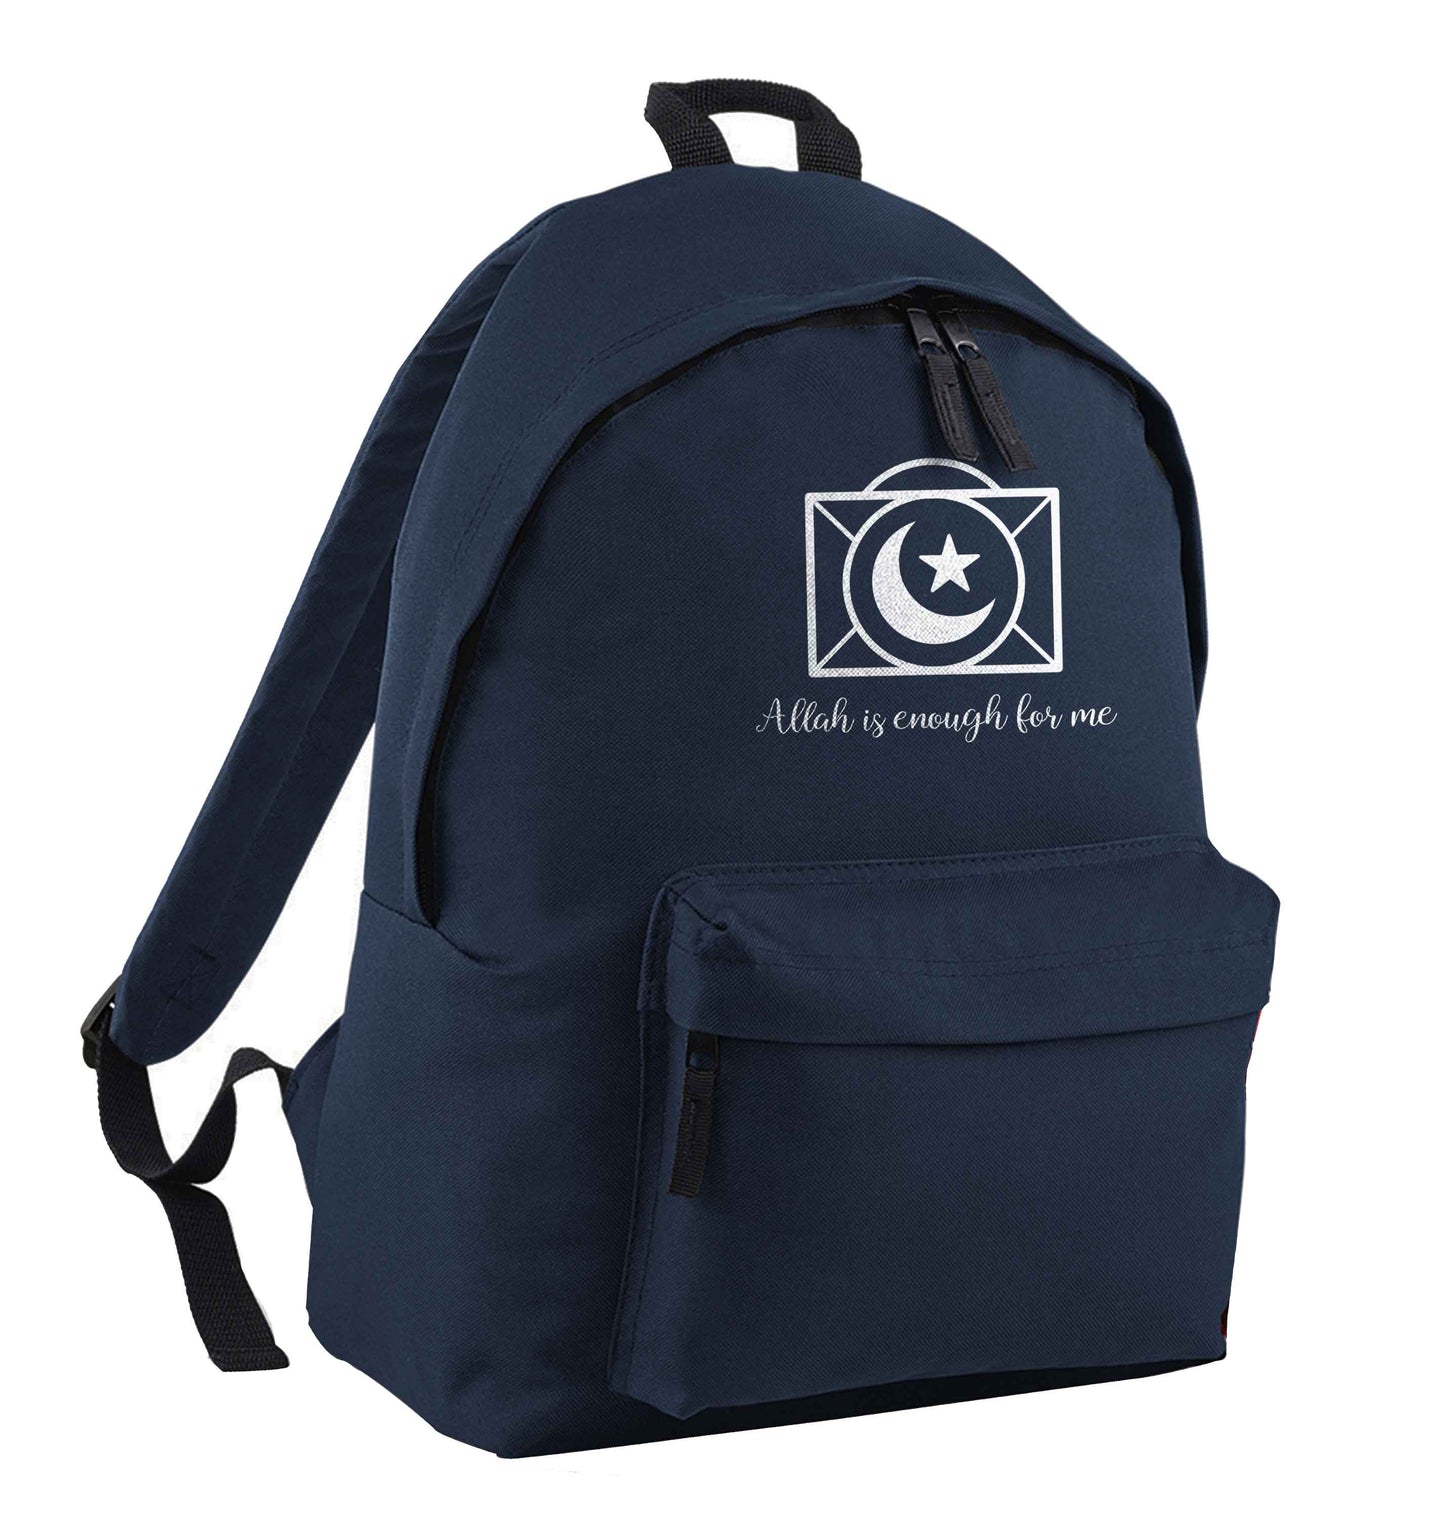 Allah is enough for me navy children's backpack